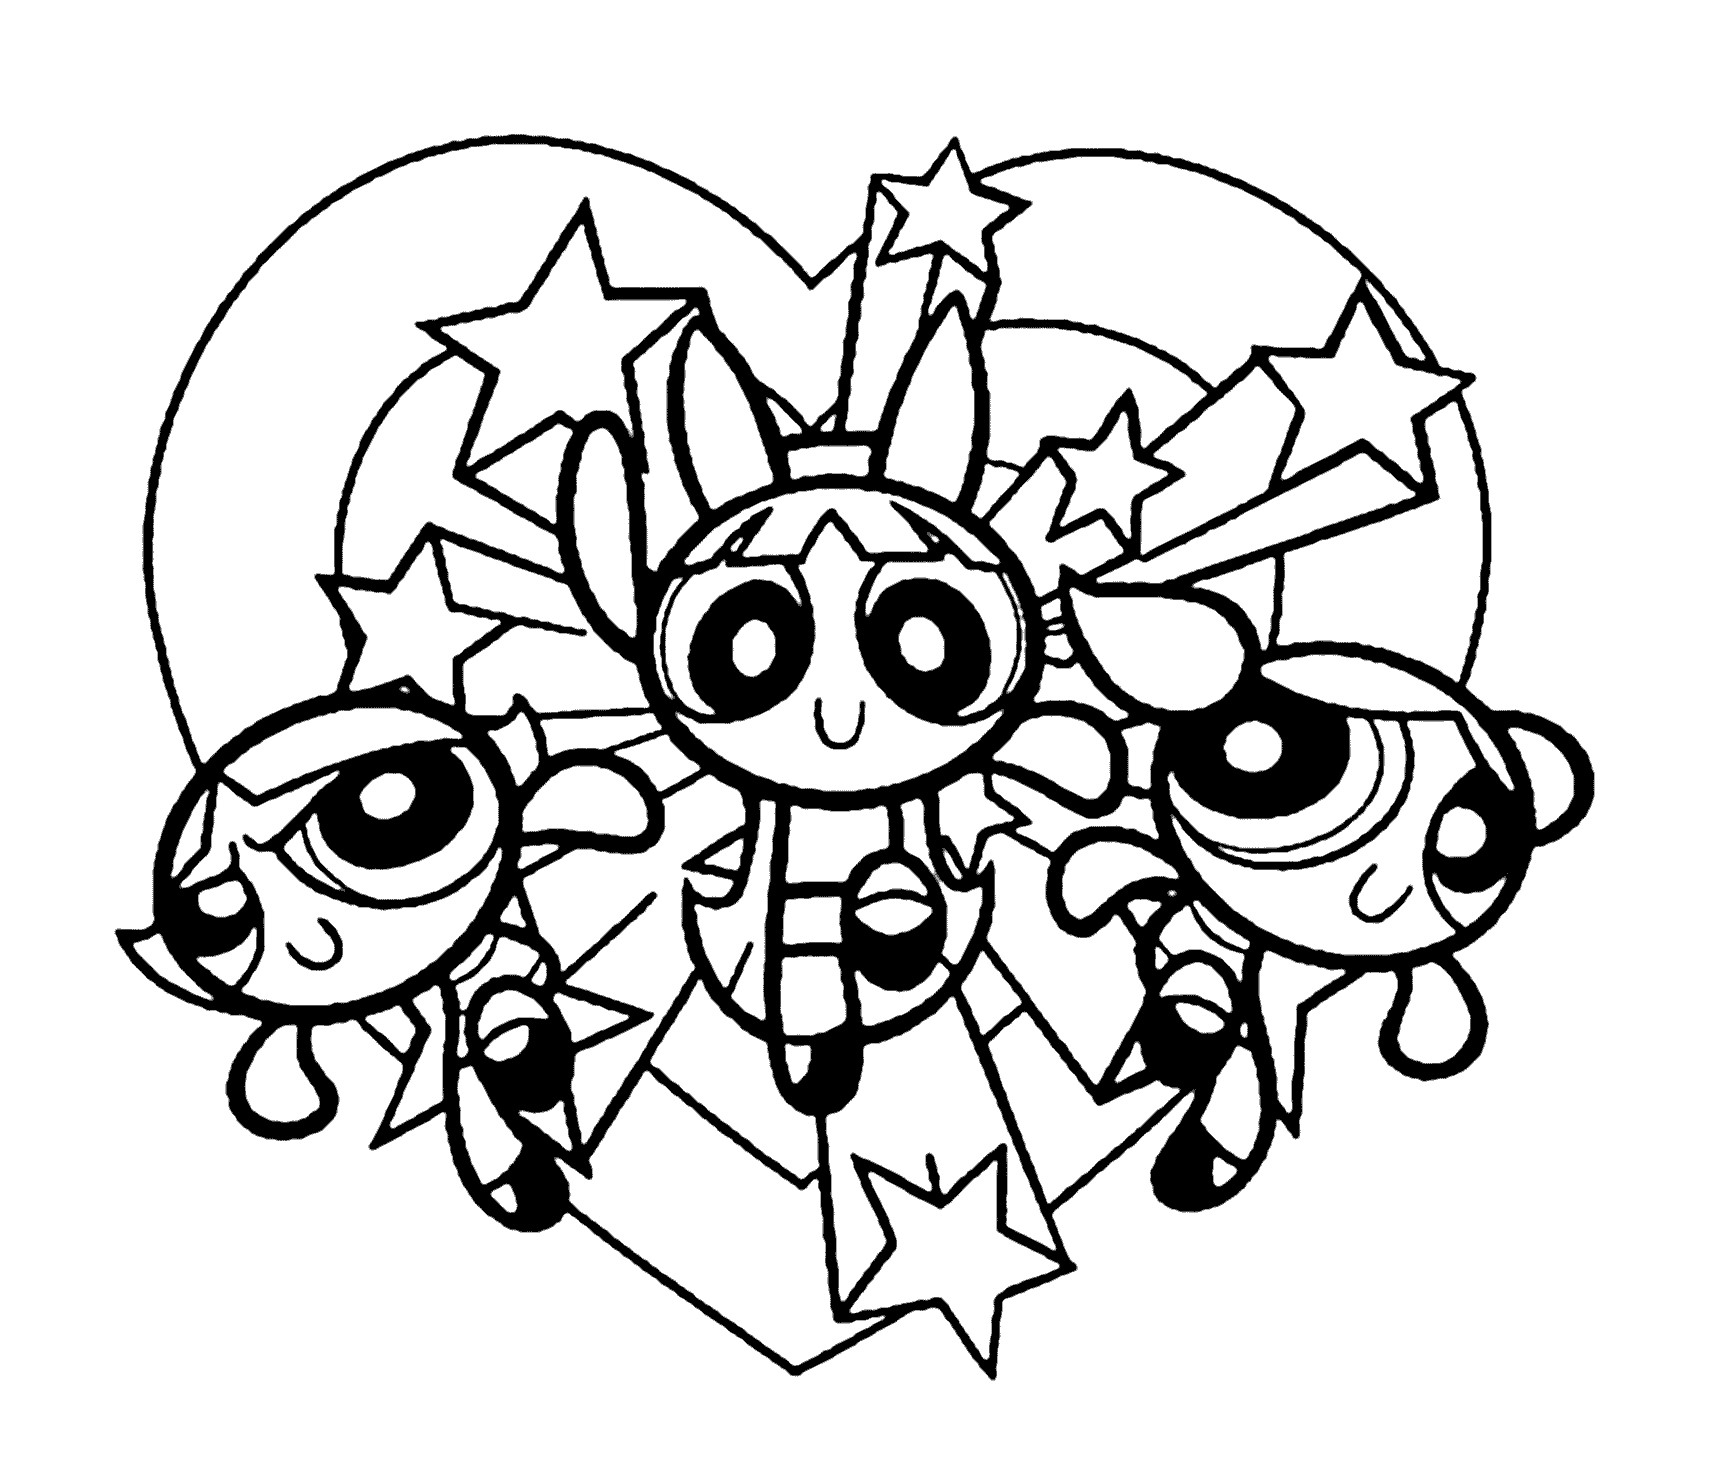 Coloring Pages Powerpuff Girls
 Powerpuff Girls Cooling Coloring Pages Kidsuki